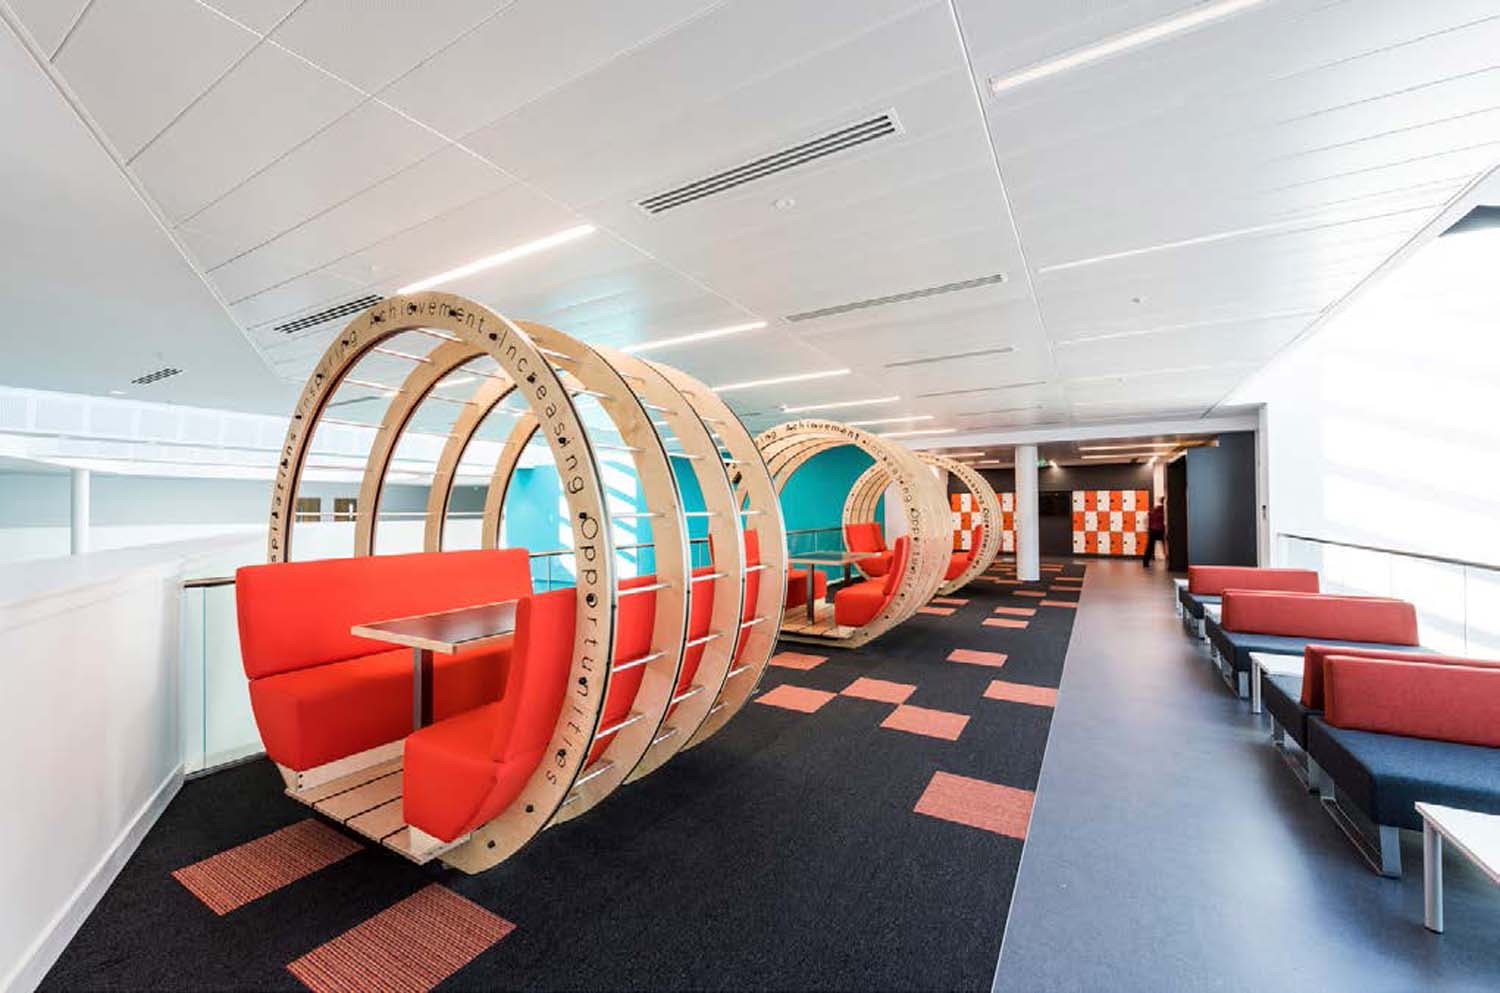 A circular wooden structure with orange upholstered seating inside set in a room with colourful seats